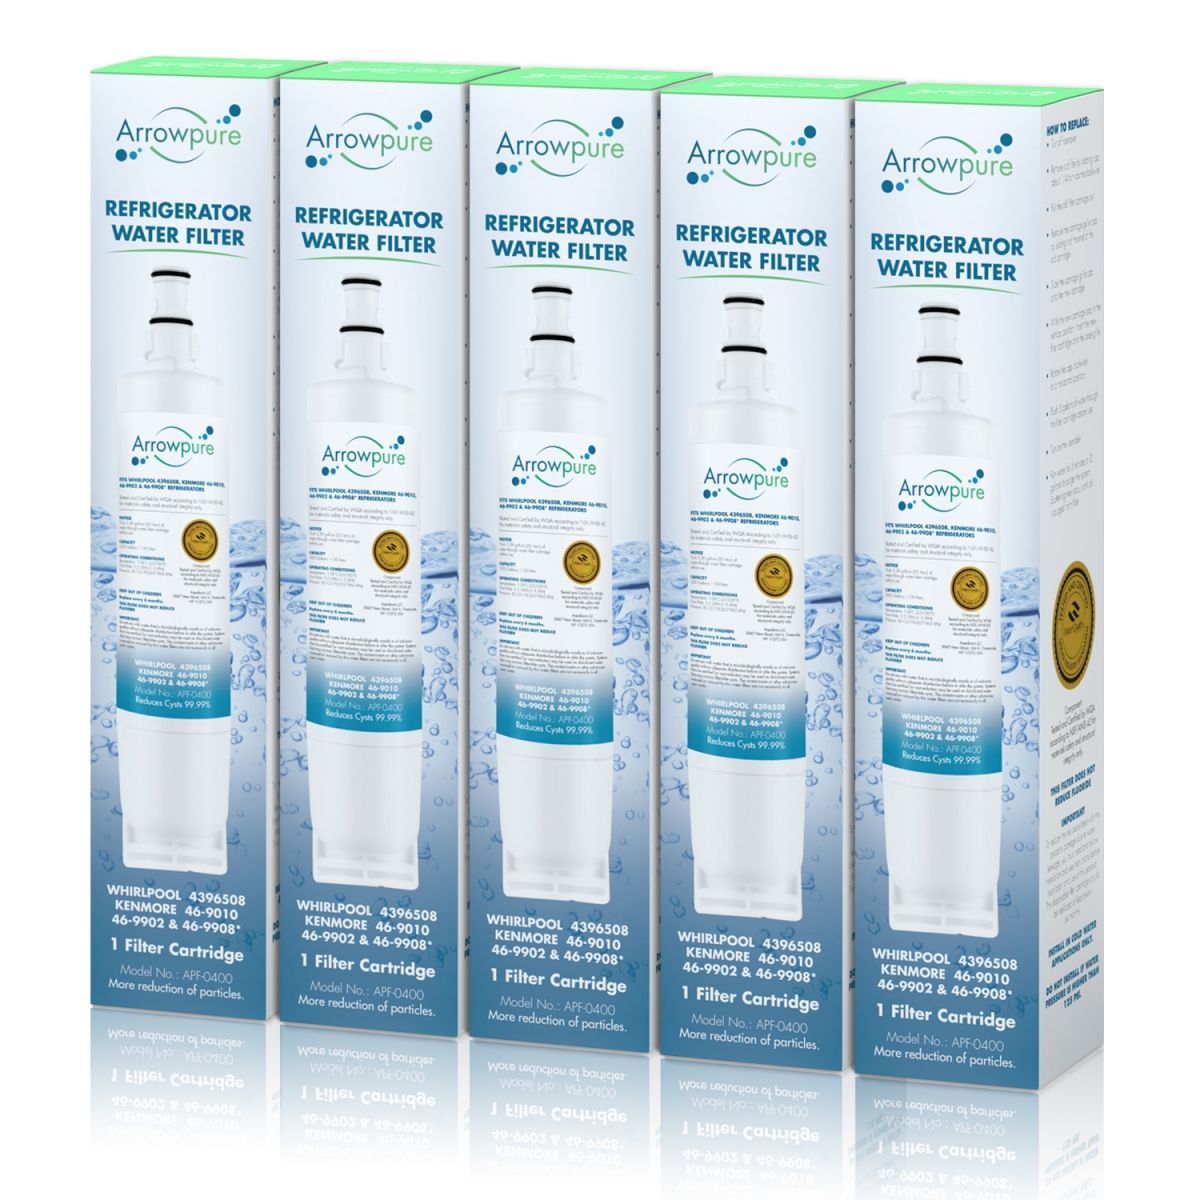 5 Pack Of Arrowpure Refrigerator Water Filter Replacement APF-0400x5